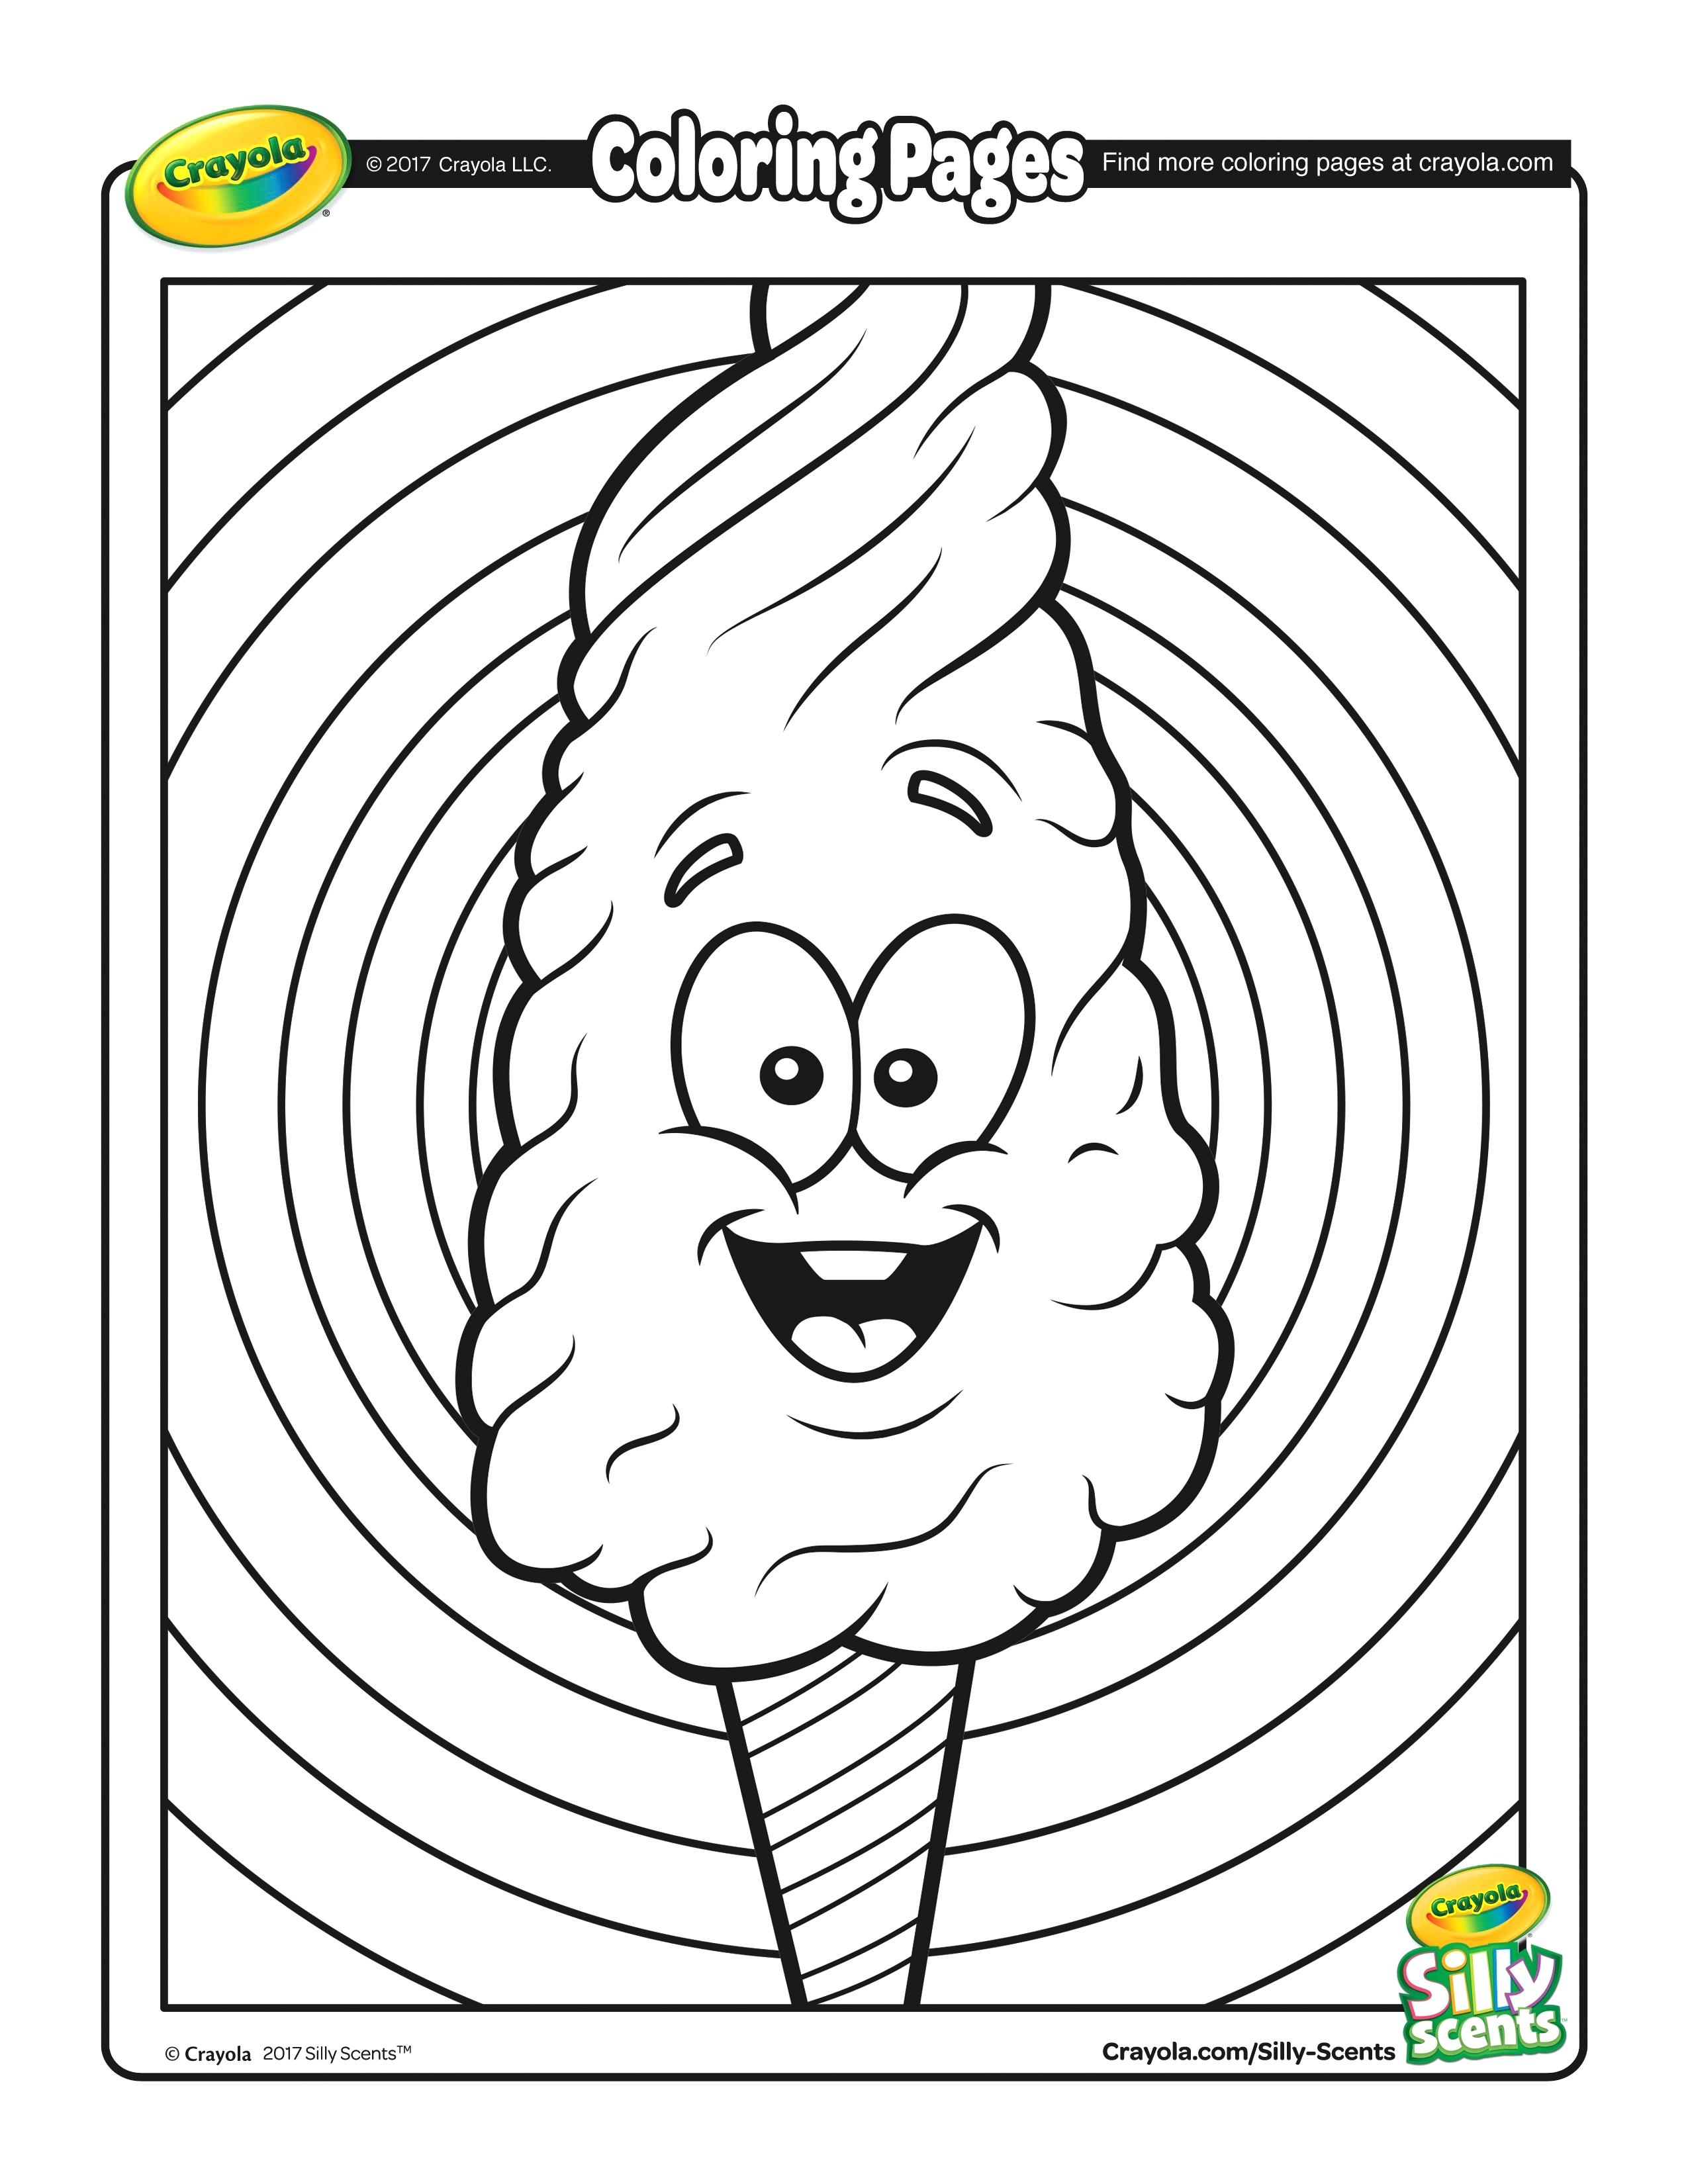 Silly Face Coloring Page at Free